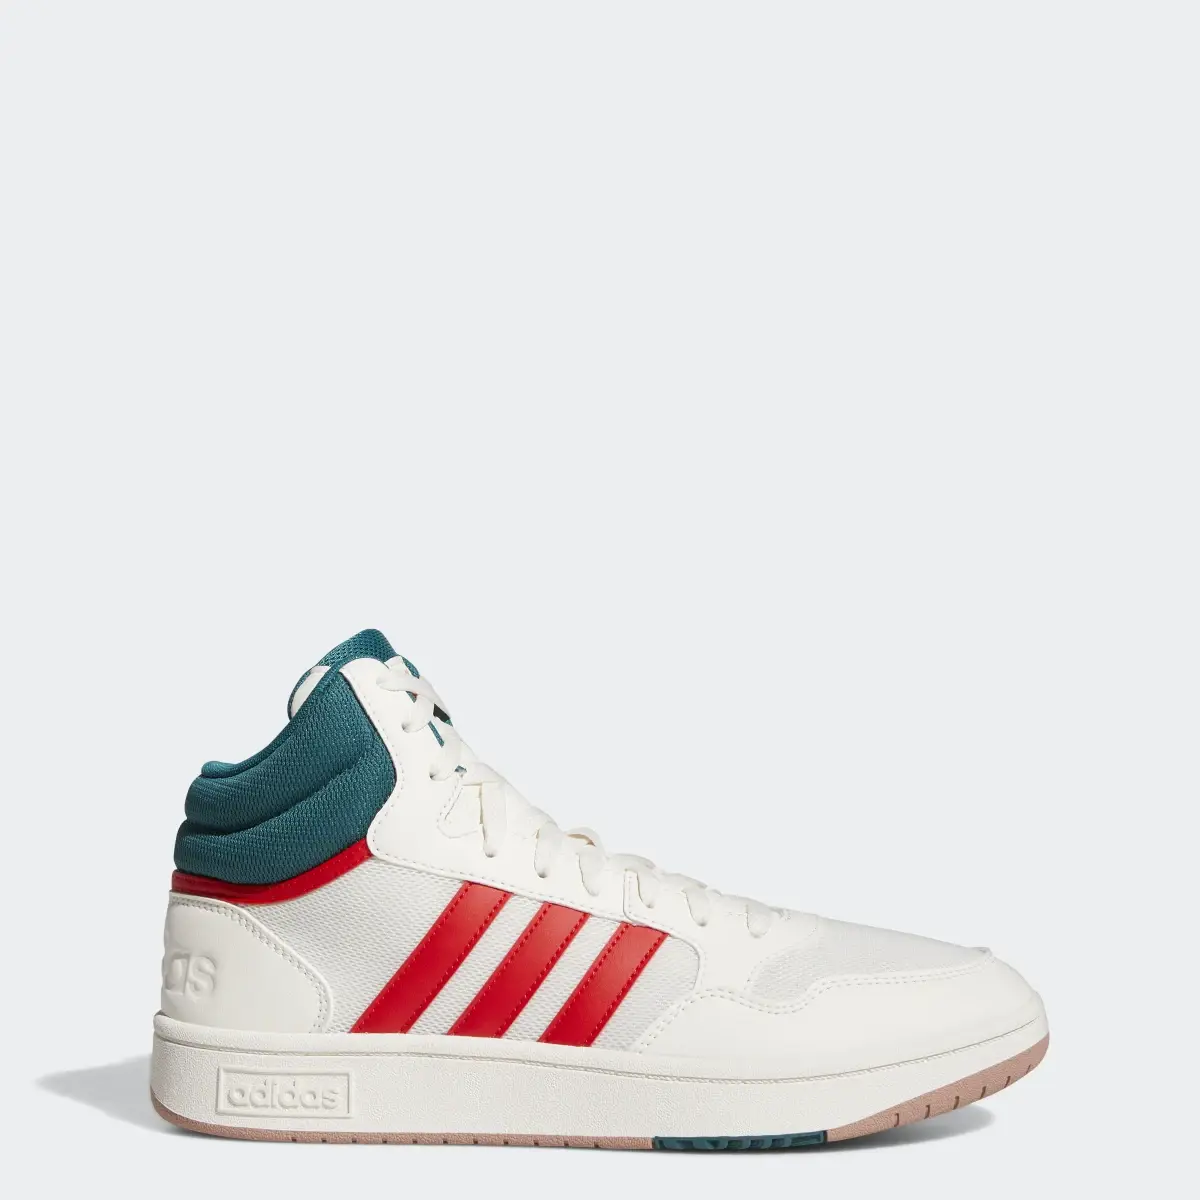 Adidas Hoops 3.0 Mid Shoes. 1